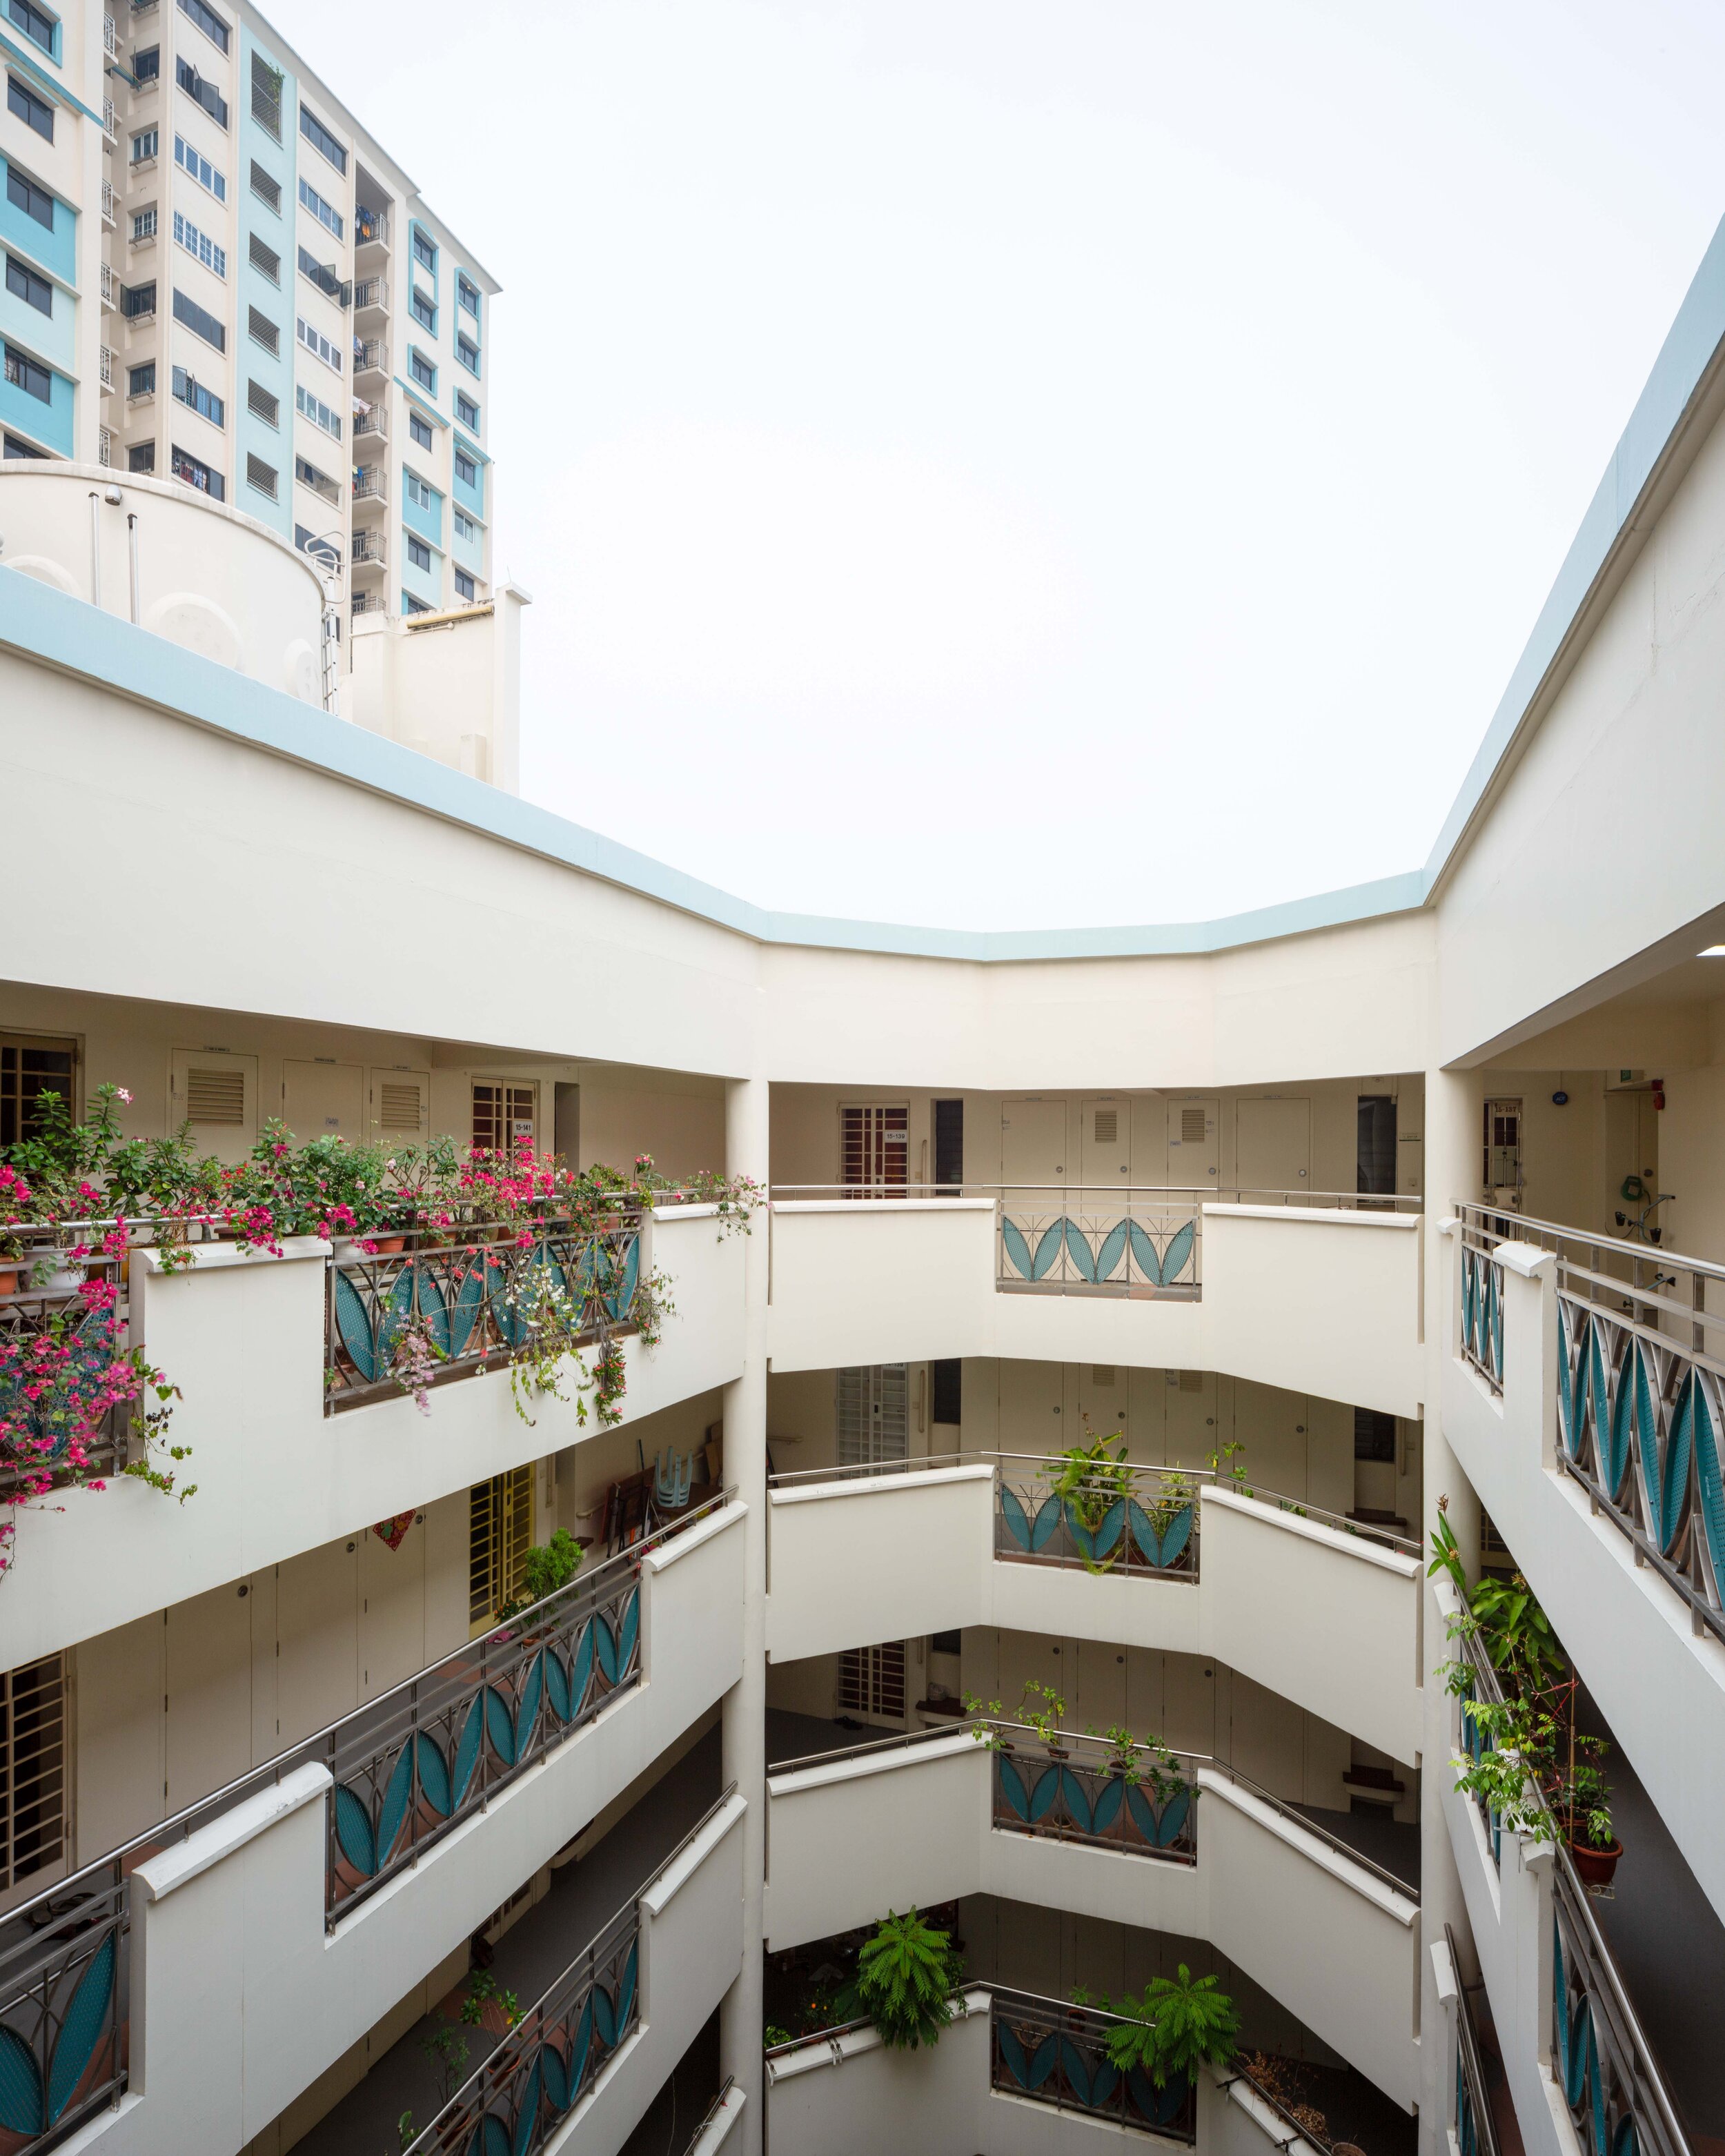 62B Lorong 4 Toa Payoh 190918 079, image by Andrew Campbell Nelson.jpg